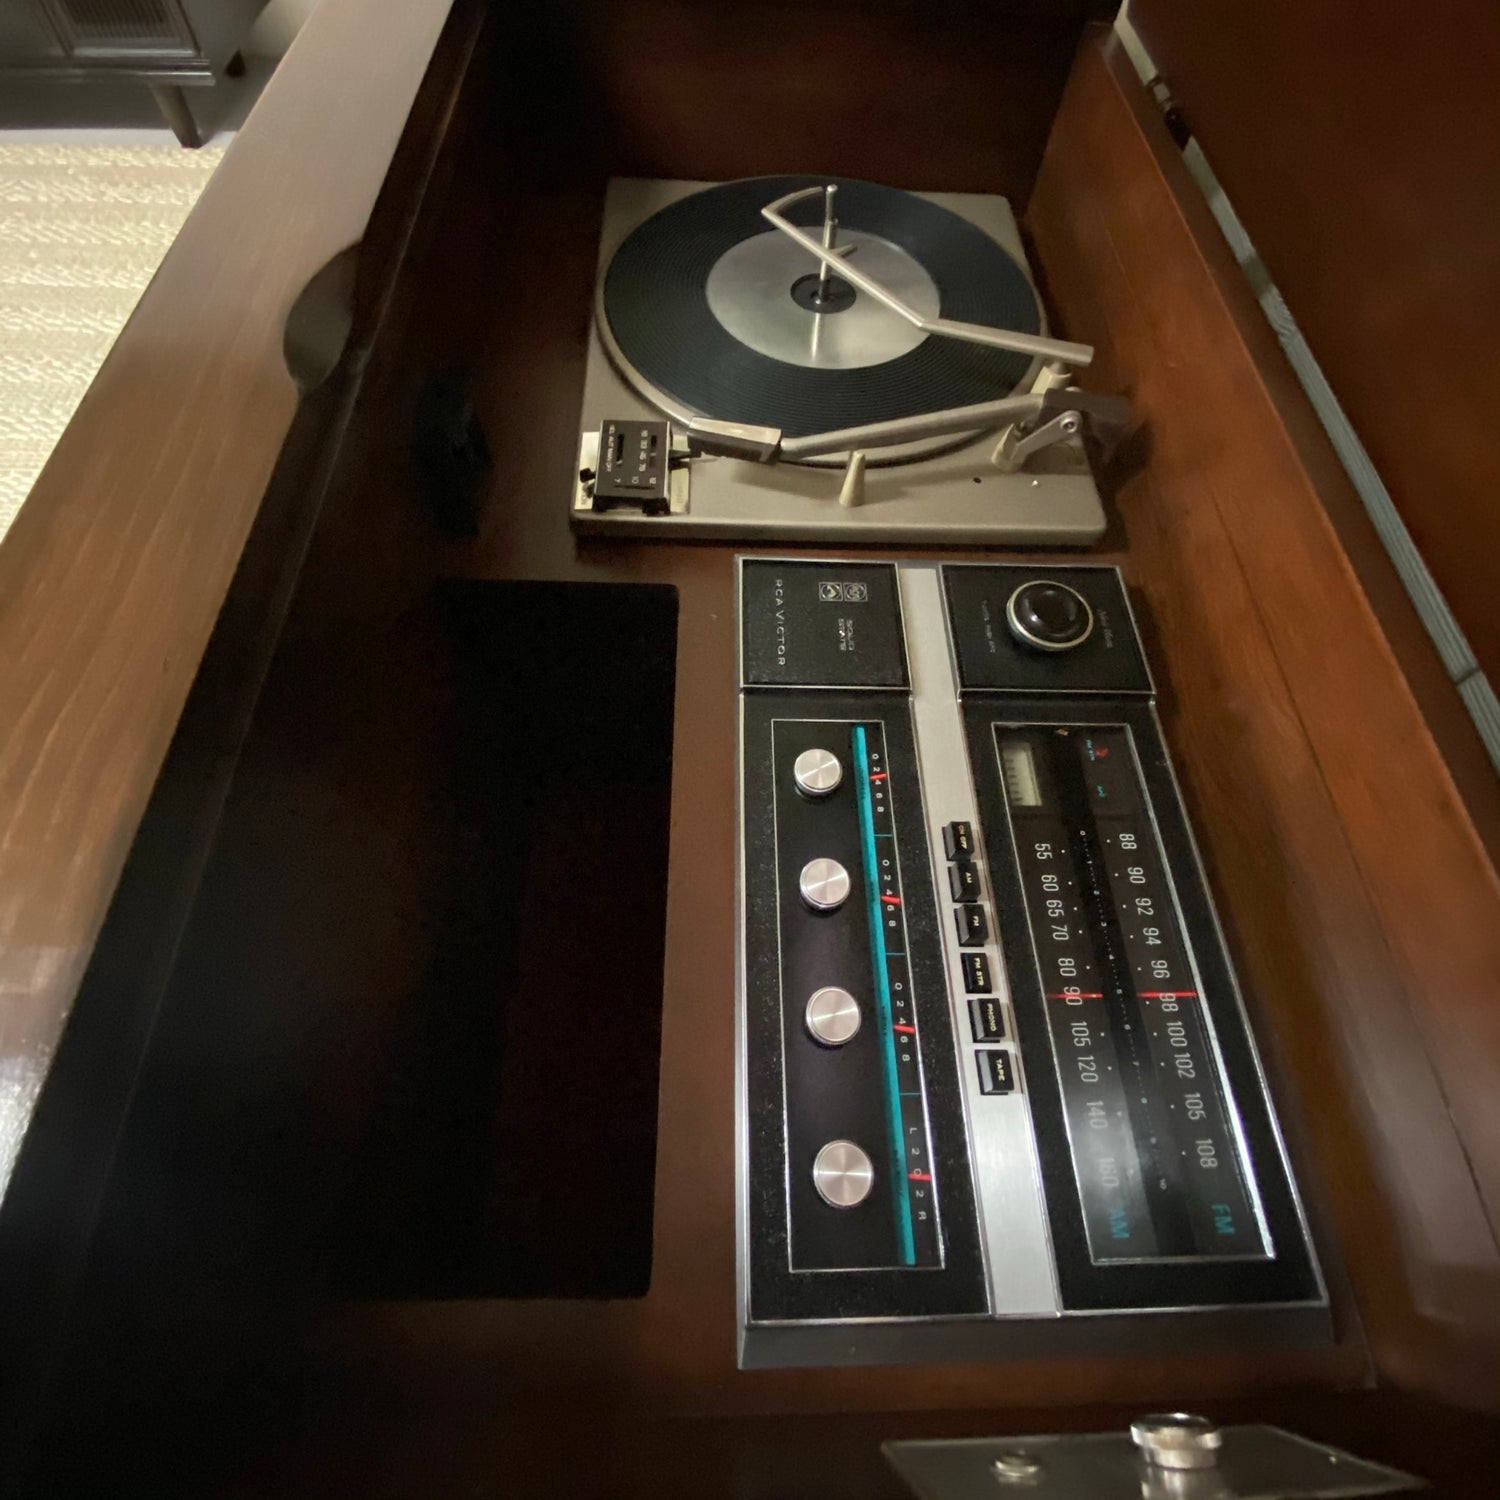 SOLD OUT **** RCA NEW VISTA VICTROLA **** BRASILIA Style Mid Century Modern Record Player Changer Stereo Console Bluetooth AM/FM Alexa The Vintedge Co.